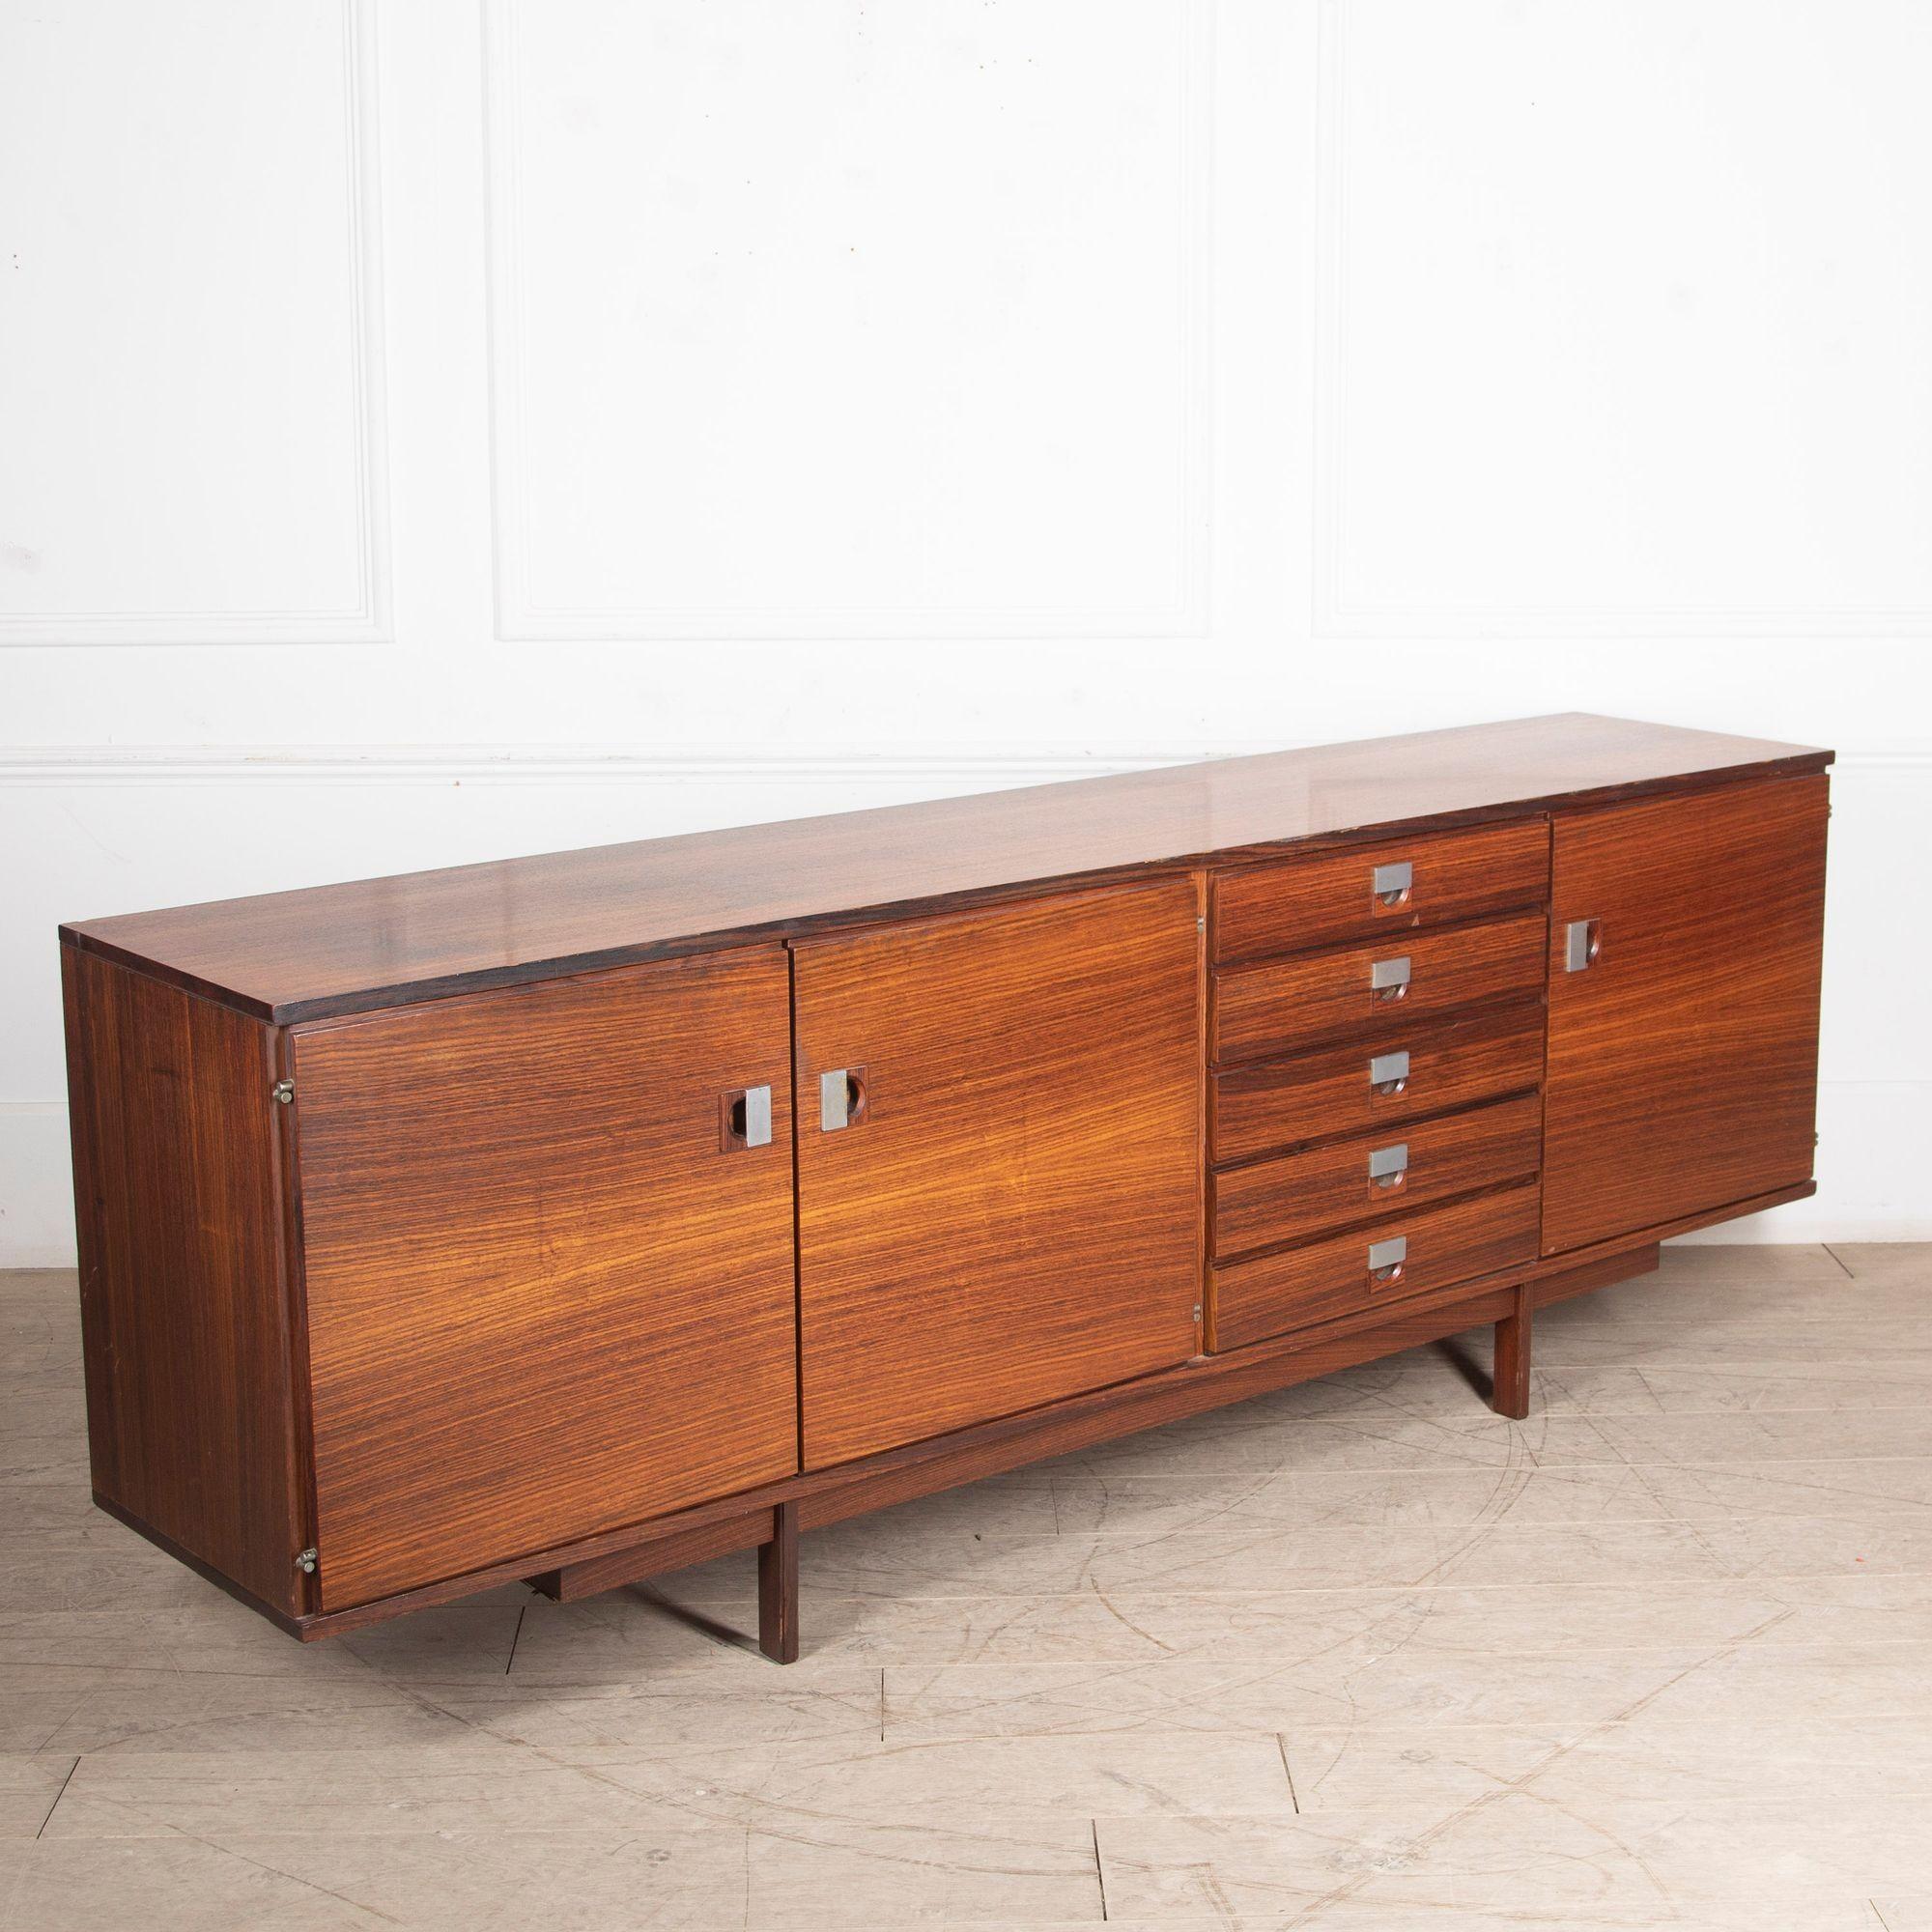 Fabulous Mid-Century rosewood sideboard.
With five small drawers and six separate shelf spaces, this makes a very functional piece of storage.
There are a few scratches and a little veneer missing but overall it is in good condition for its age.